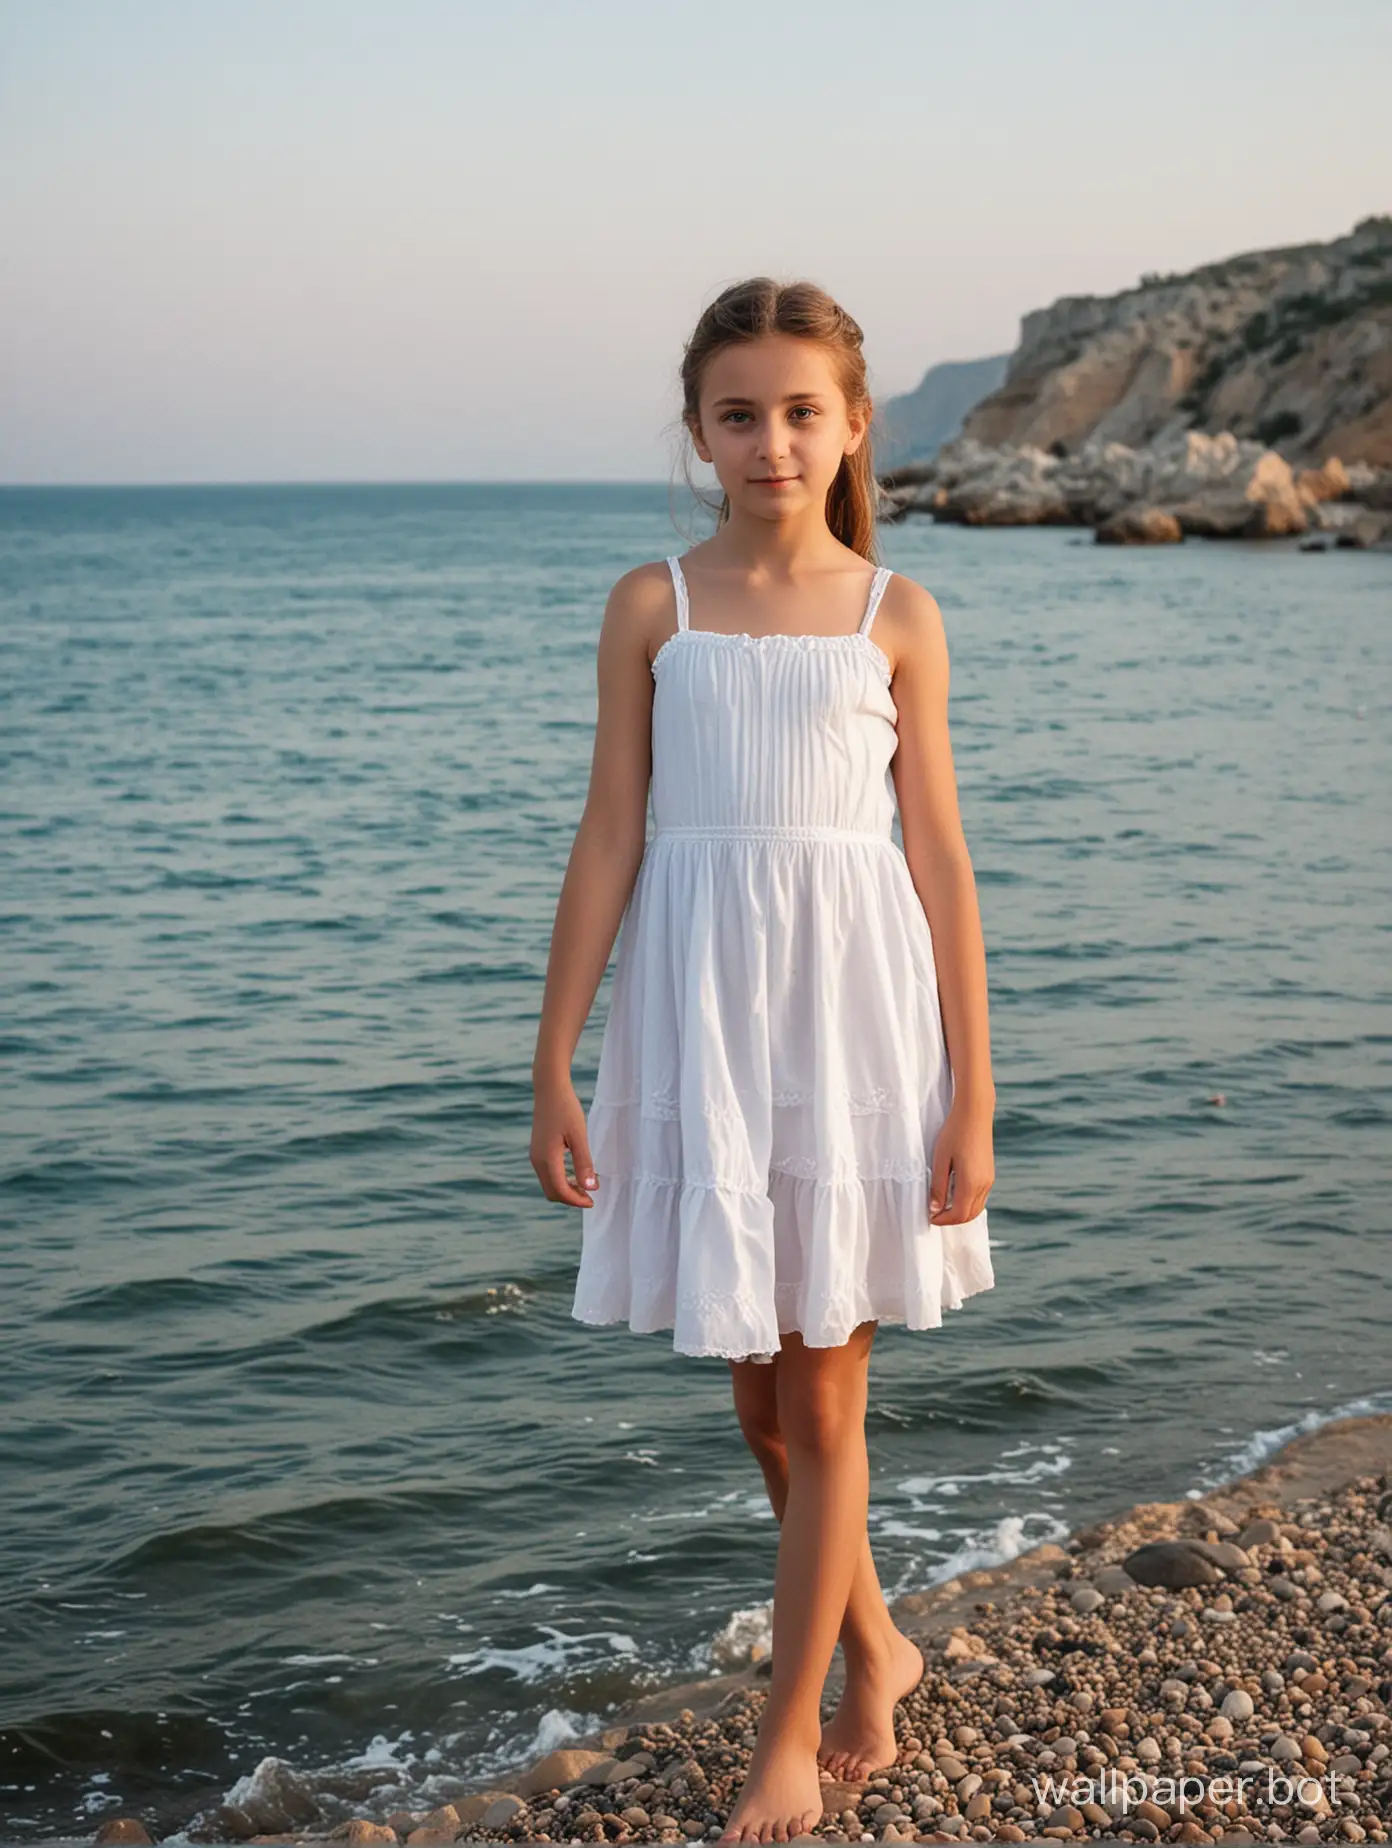 Crimea, by the sea, an 11-year-old girl in a short white dress.